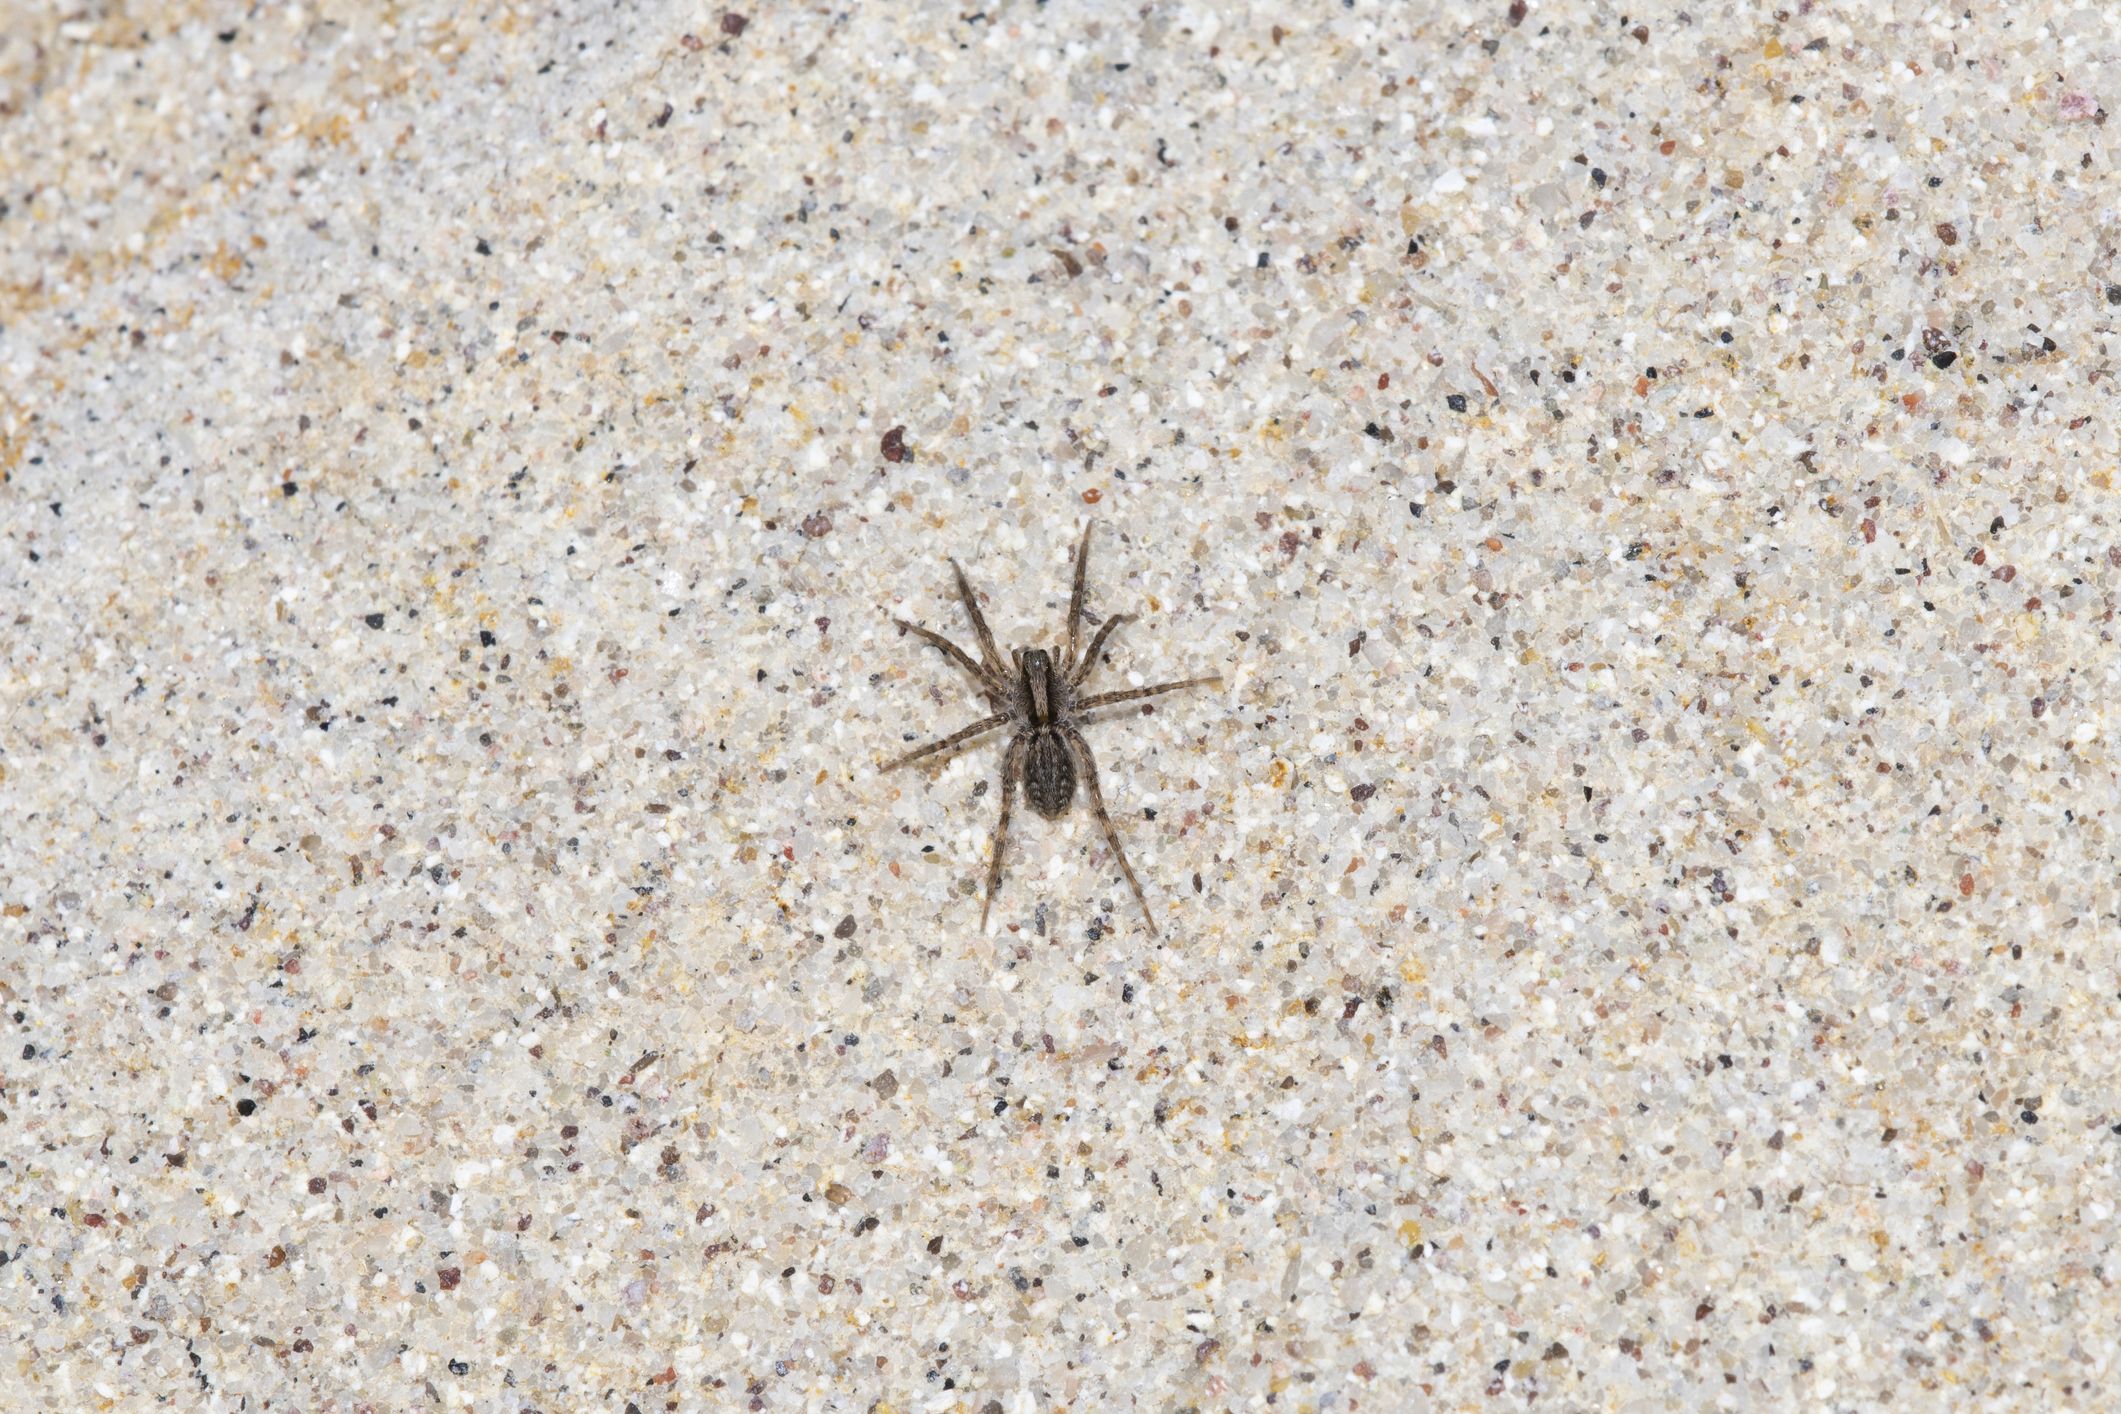 The common spiders of the United States. Spiders. 2l6 THE COMMON